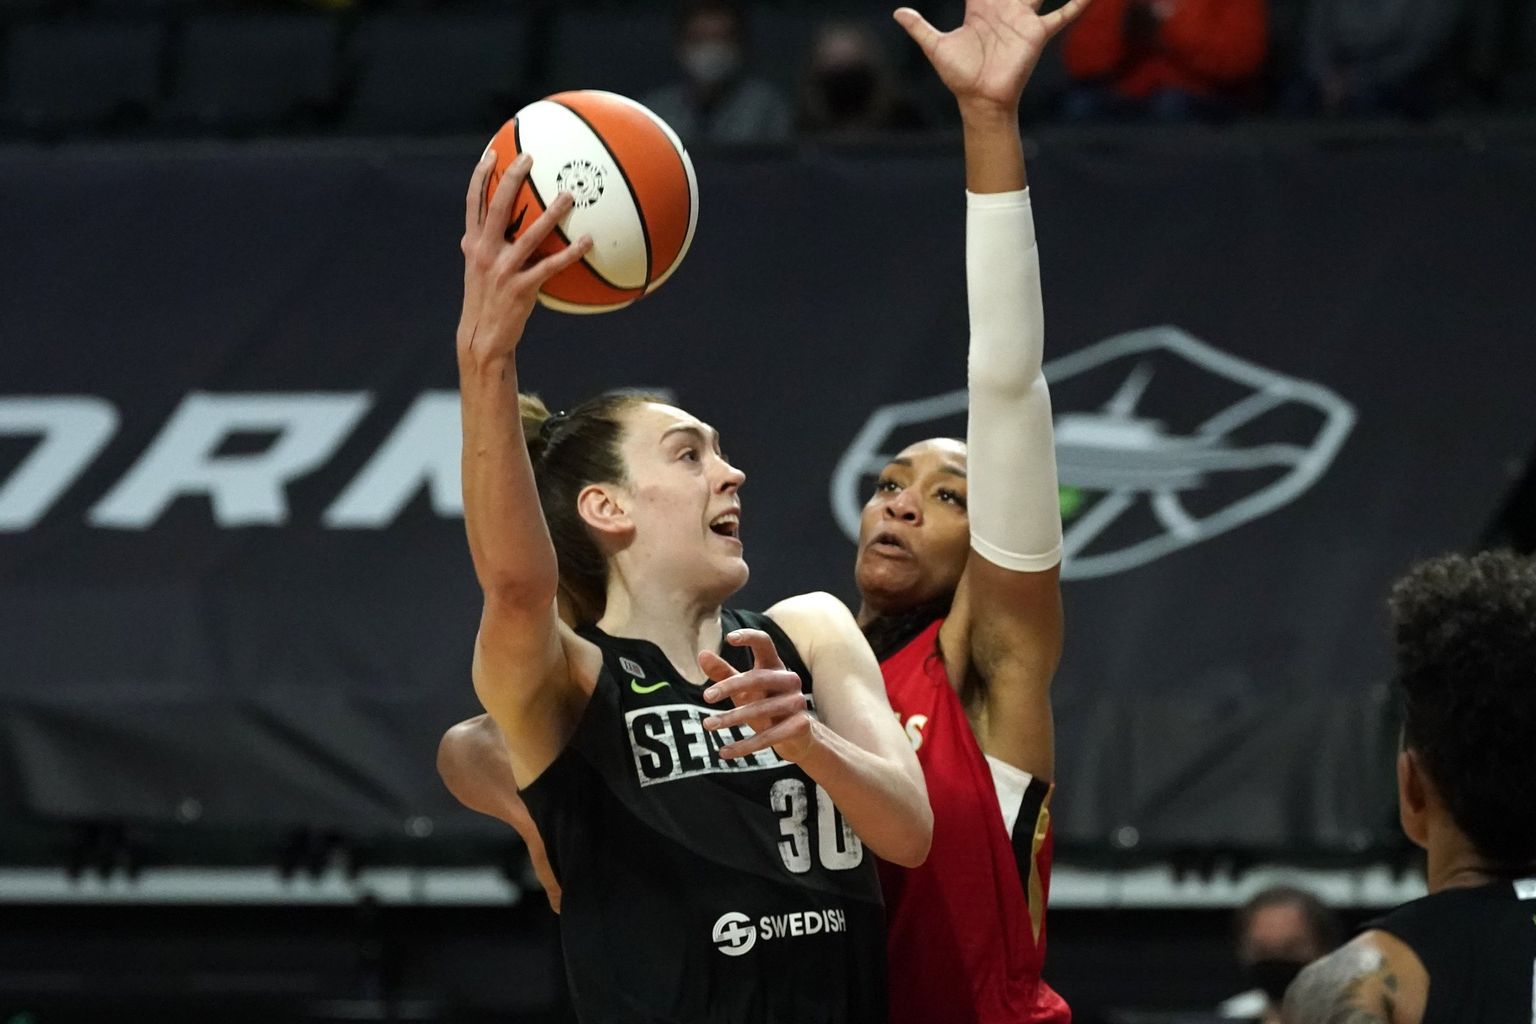 The Storm and Aces meet again at the top of the WNBA standings with a